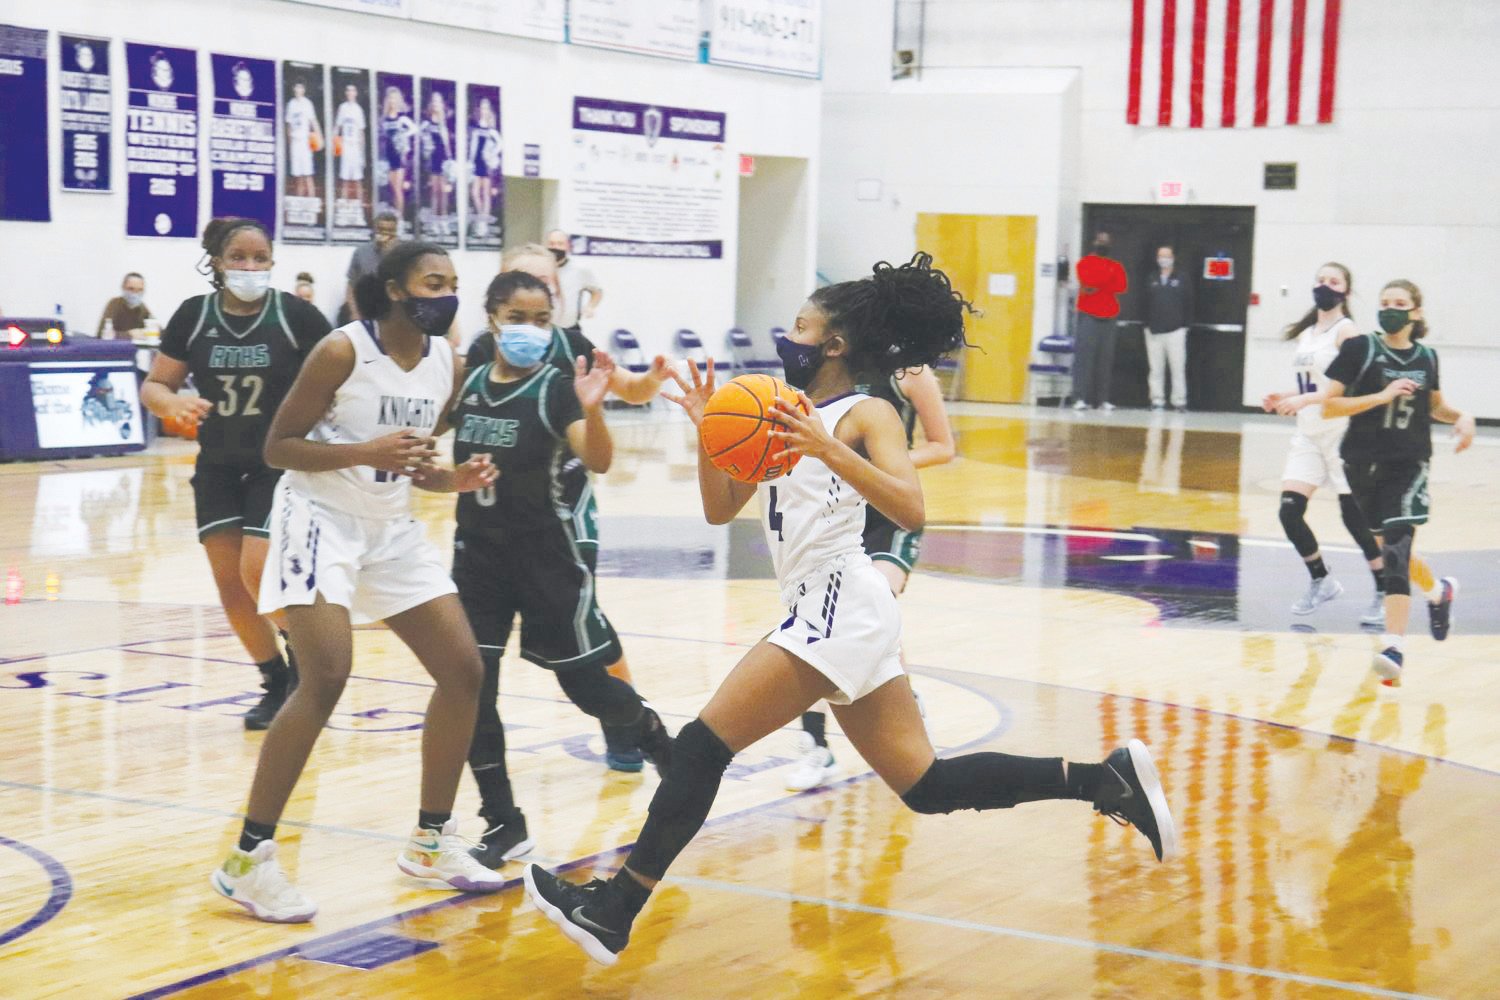 Chatham Charter then-sophomore guard Tamaya Walden (4) had 14 points and a number of fast-break layups in the Knights' home win over Research Triangle on Jan 12.